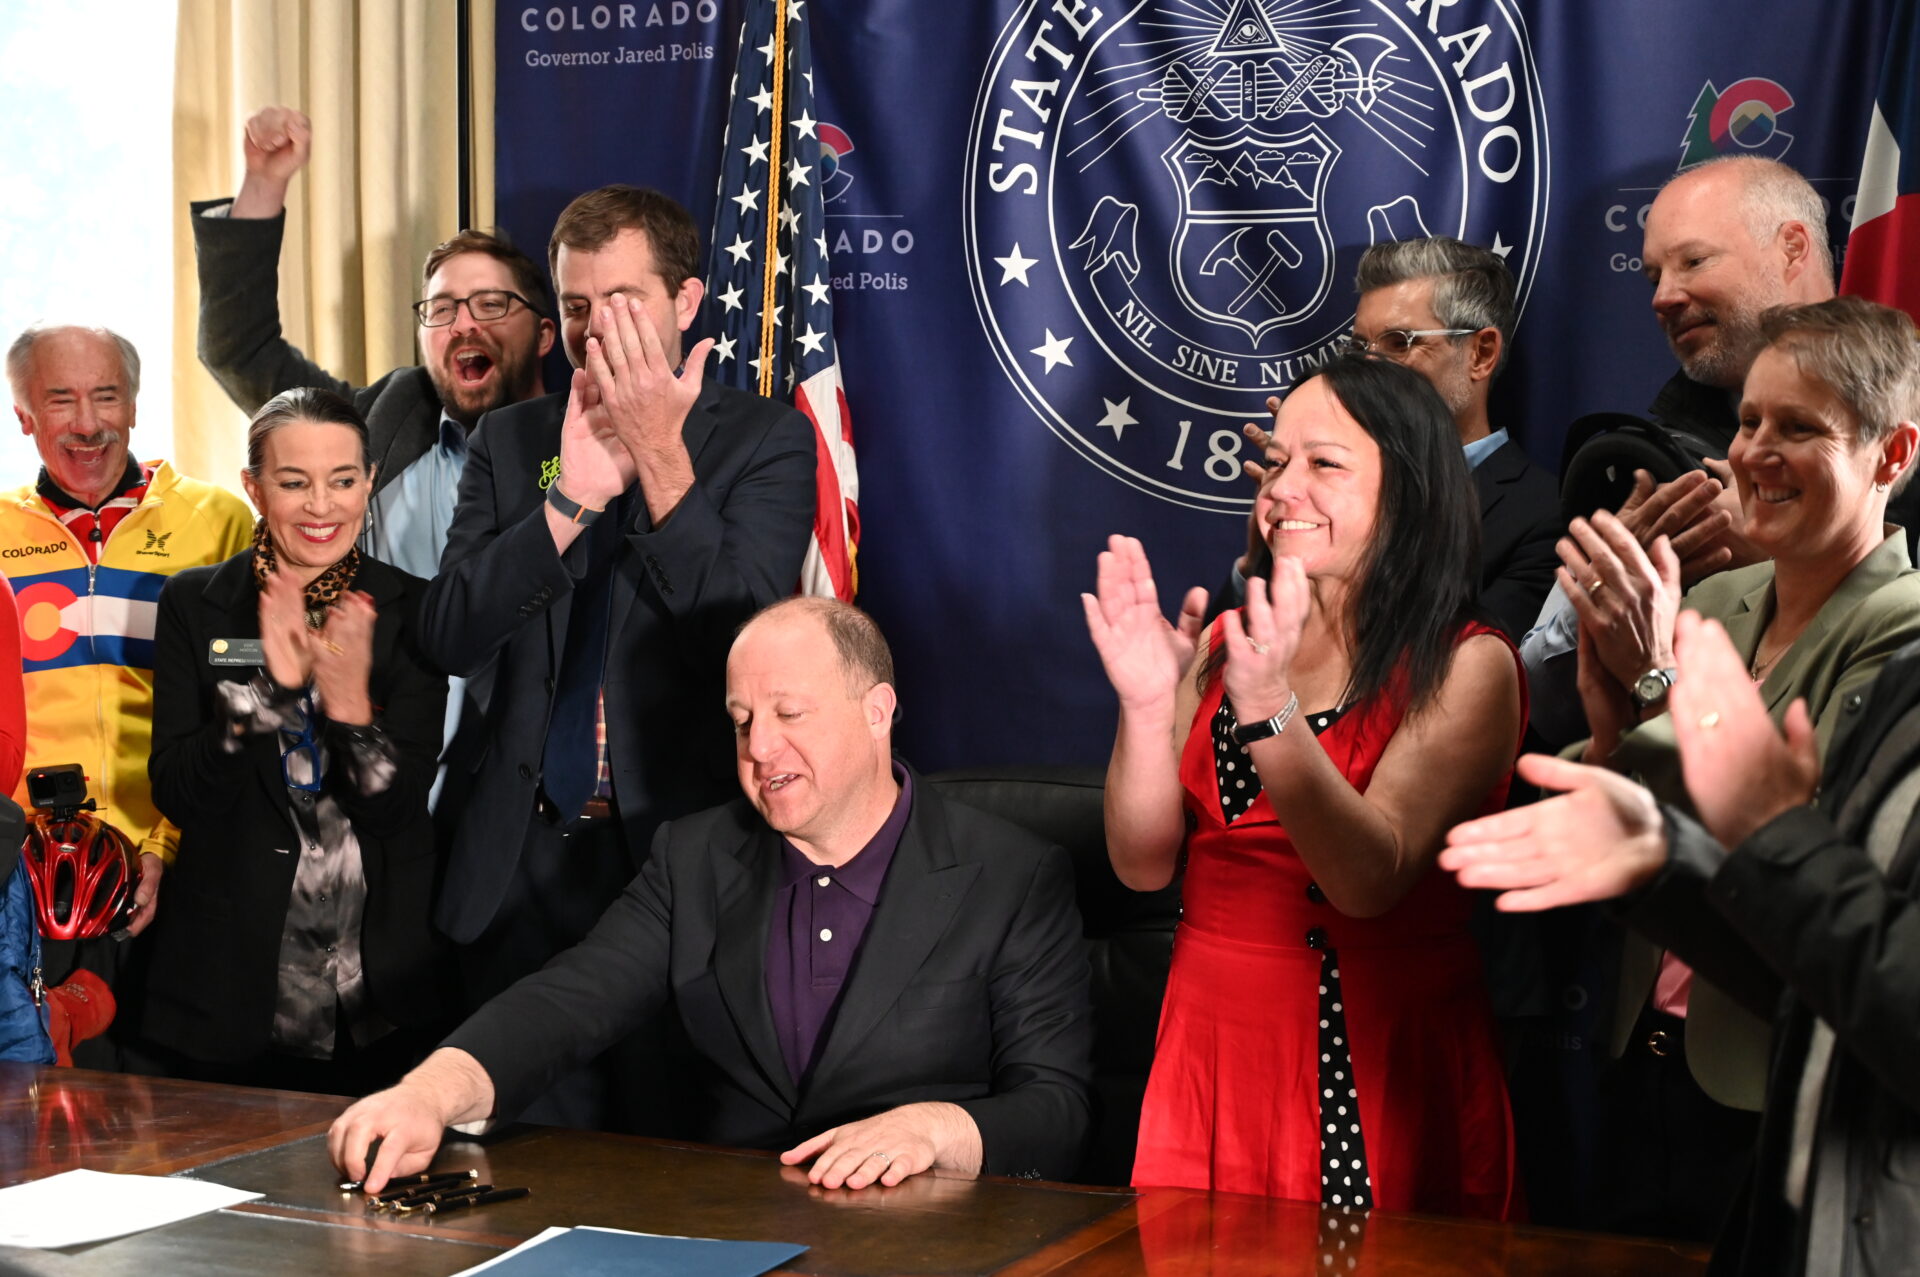 The Governor of Colorado signing a bill at his desk surrounded by people standing and cheering.